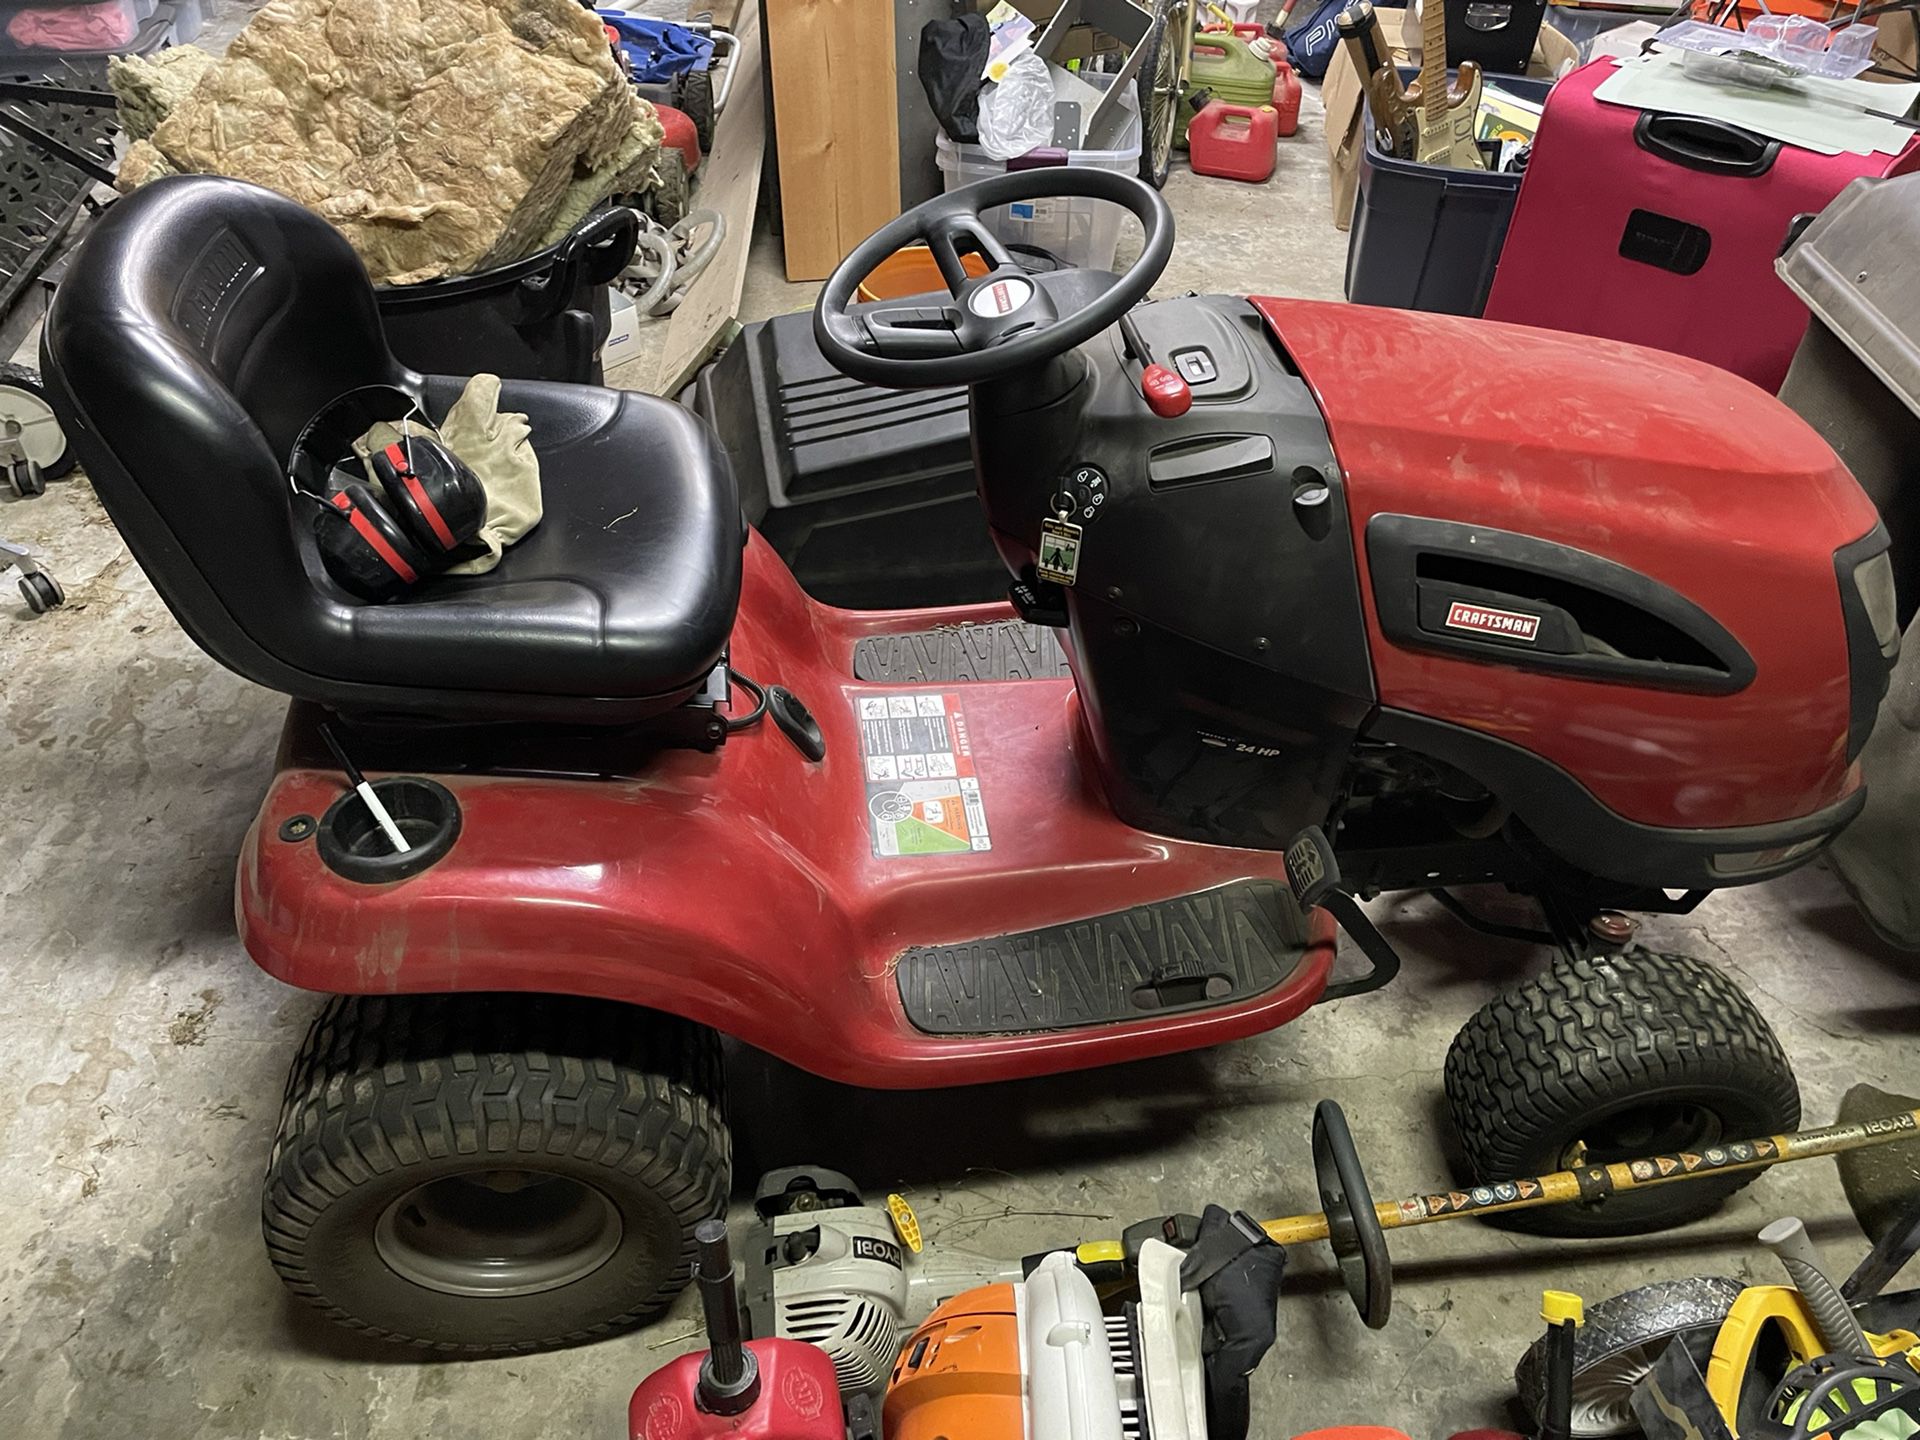 Craftsman Riding Lawn Mower With A Double Bagger System